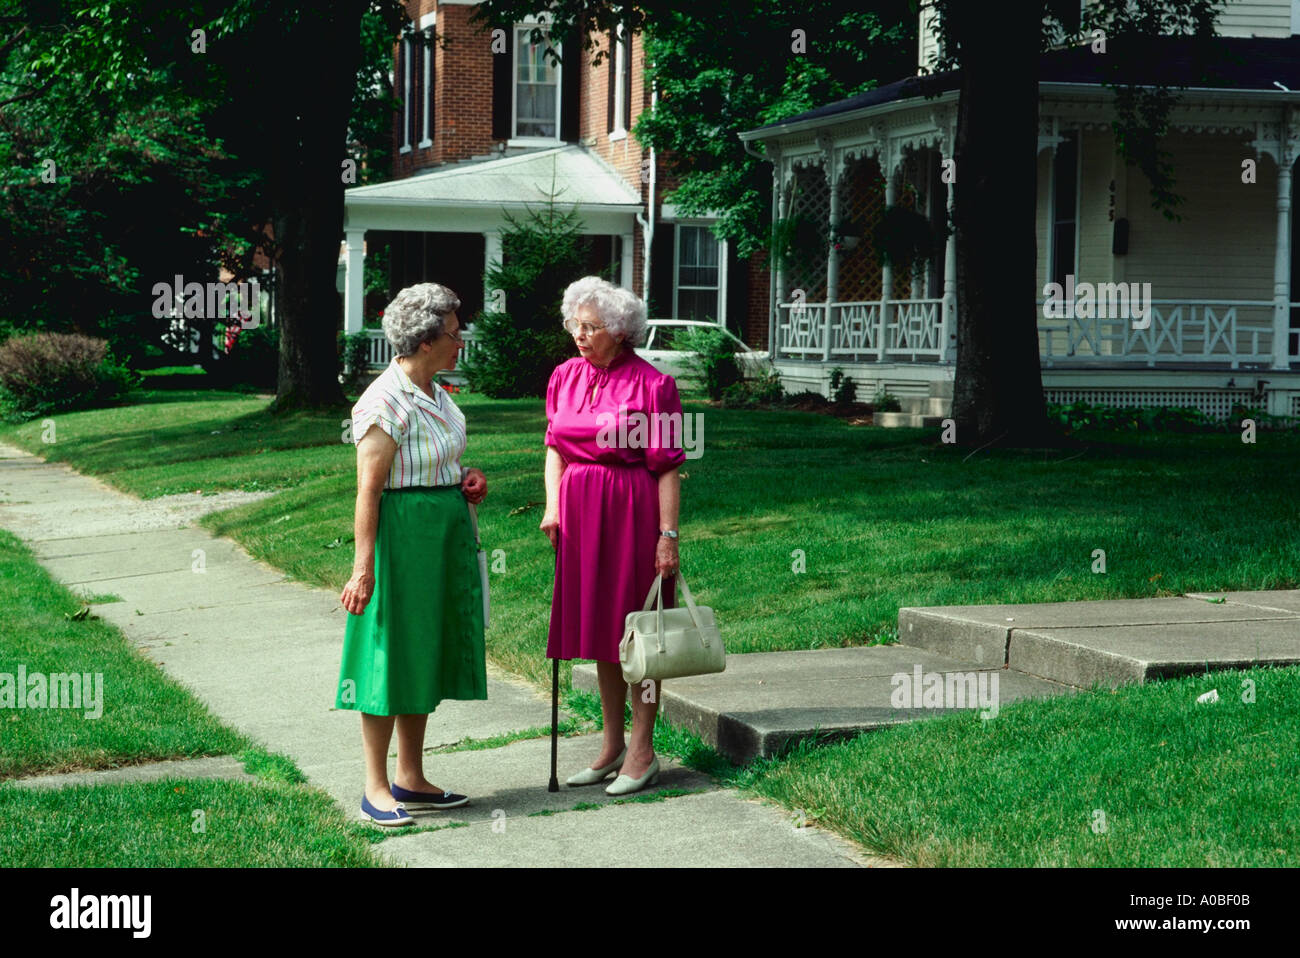 Marvine Bashore and Nellie Poorman on small town street in Wilmington Ohio Stock Photo